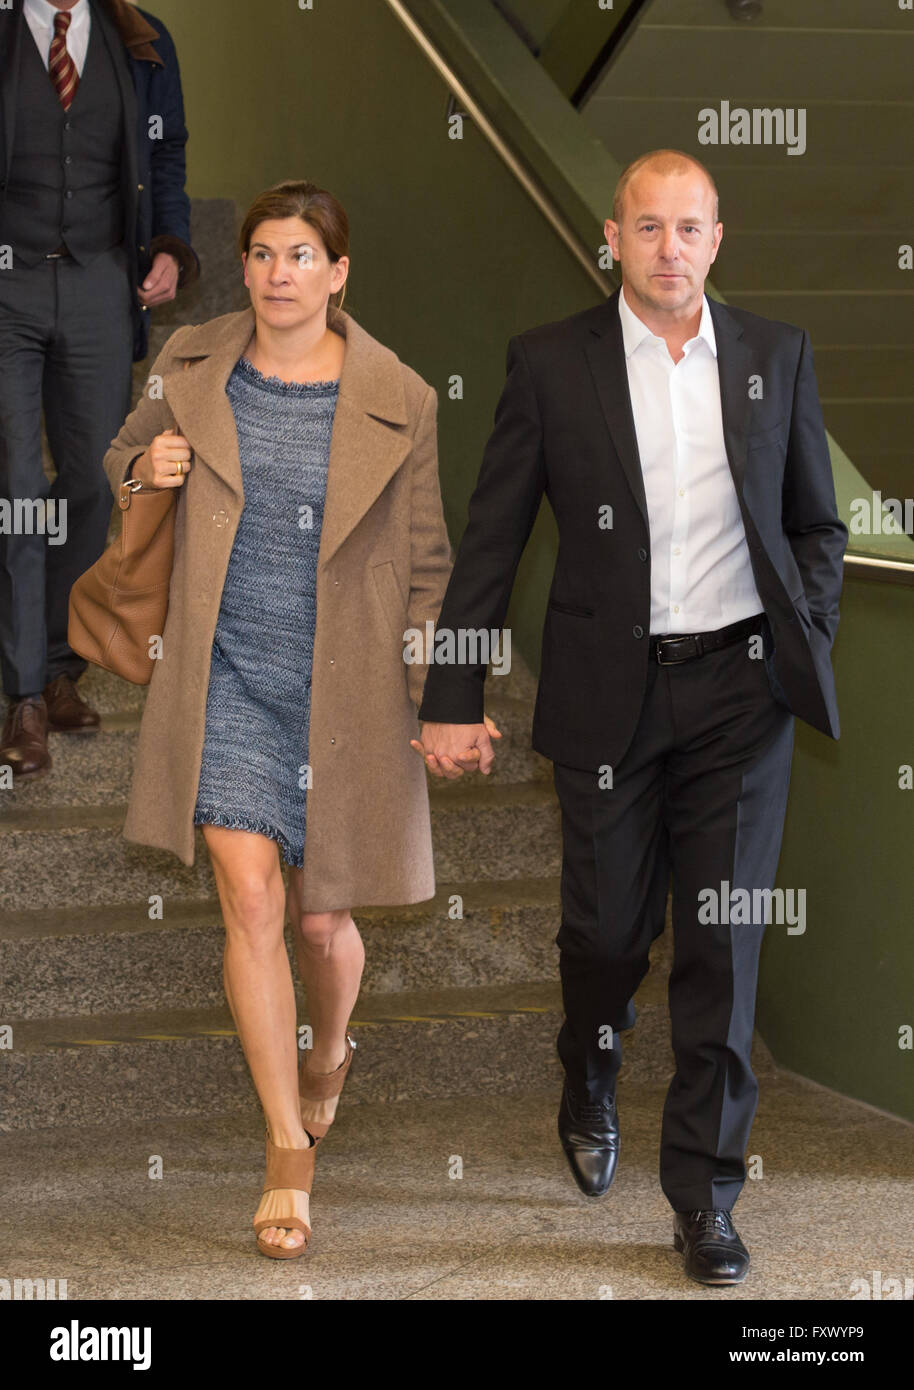 Munich, Germany. 19th Apr, 2016. Actor Heino Ferch and his wife Marie-Jeanette arriving as witnesses in a trial concerning bodily harm at the regional court in Munich, Germany, 19 April 2016. Ferch was involved in a fight in 2014 from which he received injuries. PHOTO: TOBIAS HASE/dpa/Alamy Live News Stock Photo